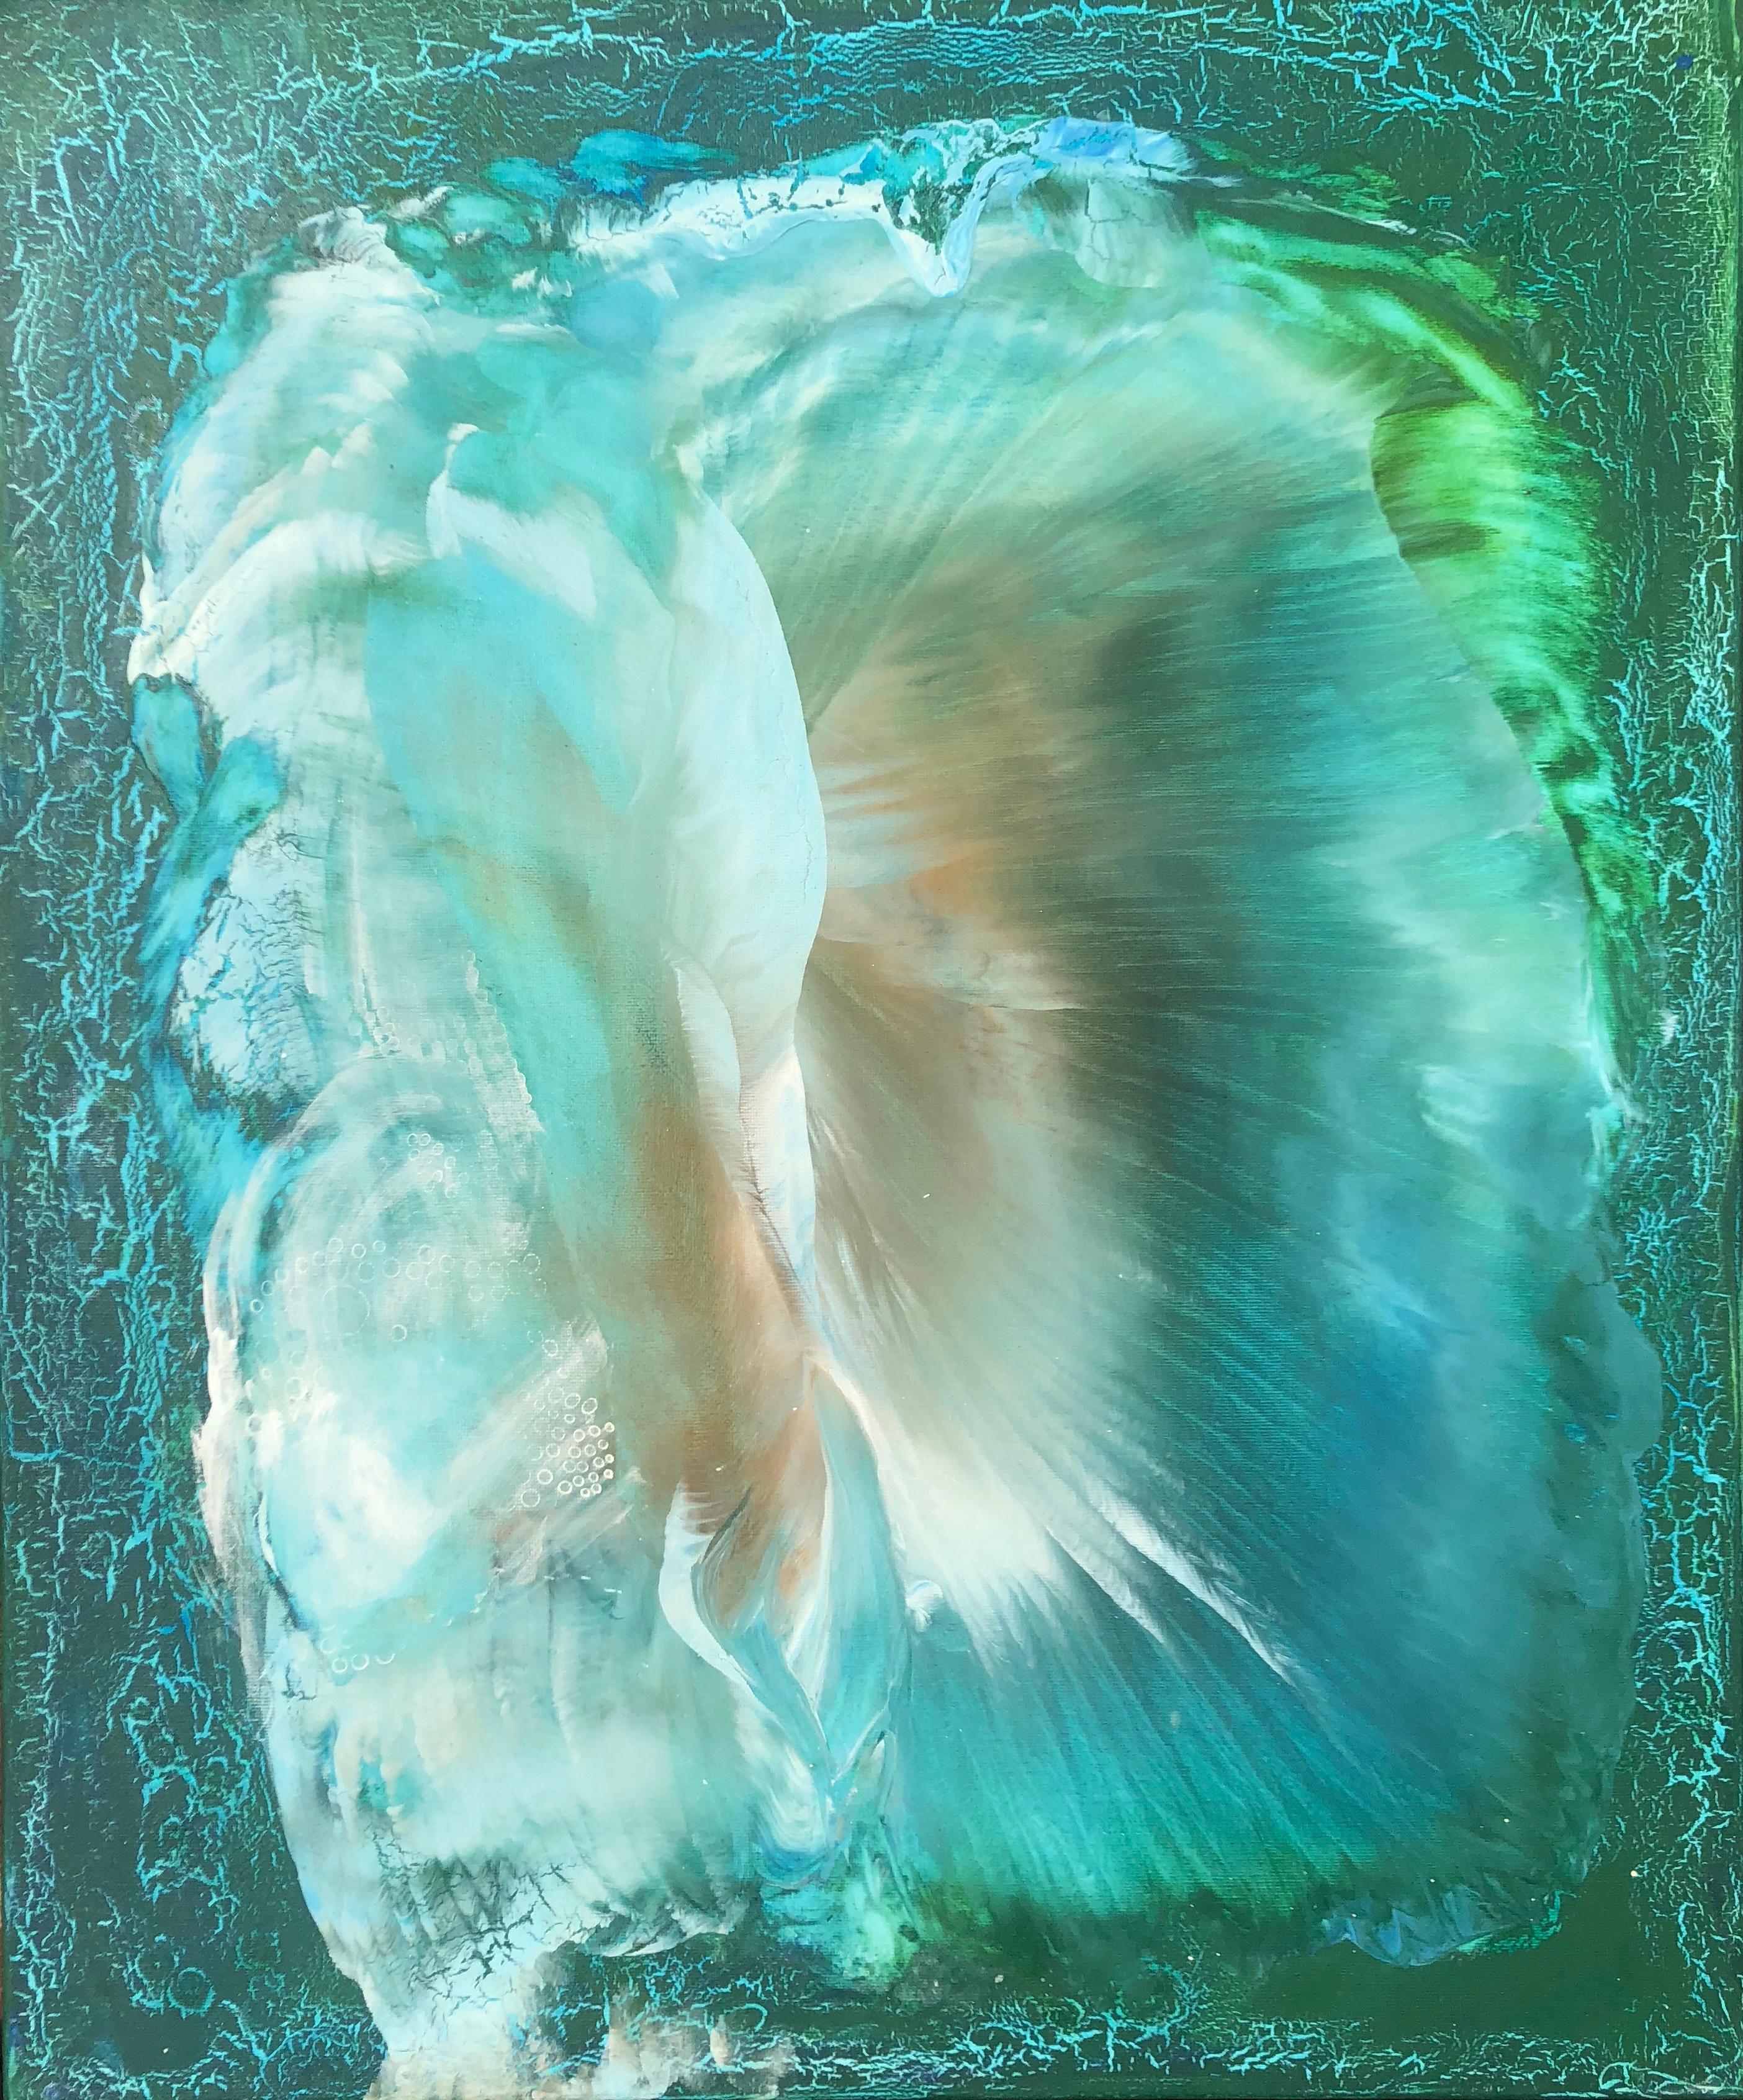 Contemporary abstract painting on canvas by Volodymyr Zayichenko
In blue green and white hue created in 2016.
Unique painting on canvas 60x50cm is guaranteed to be included in a Catalogue Raisonne and provided with a blockchain based Certificate of